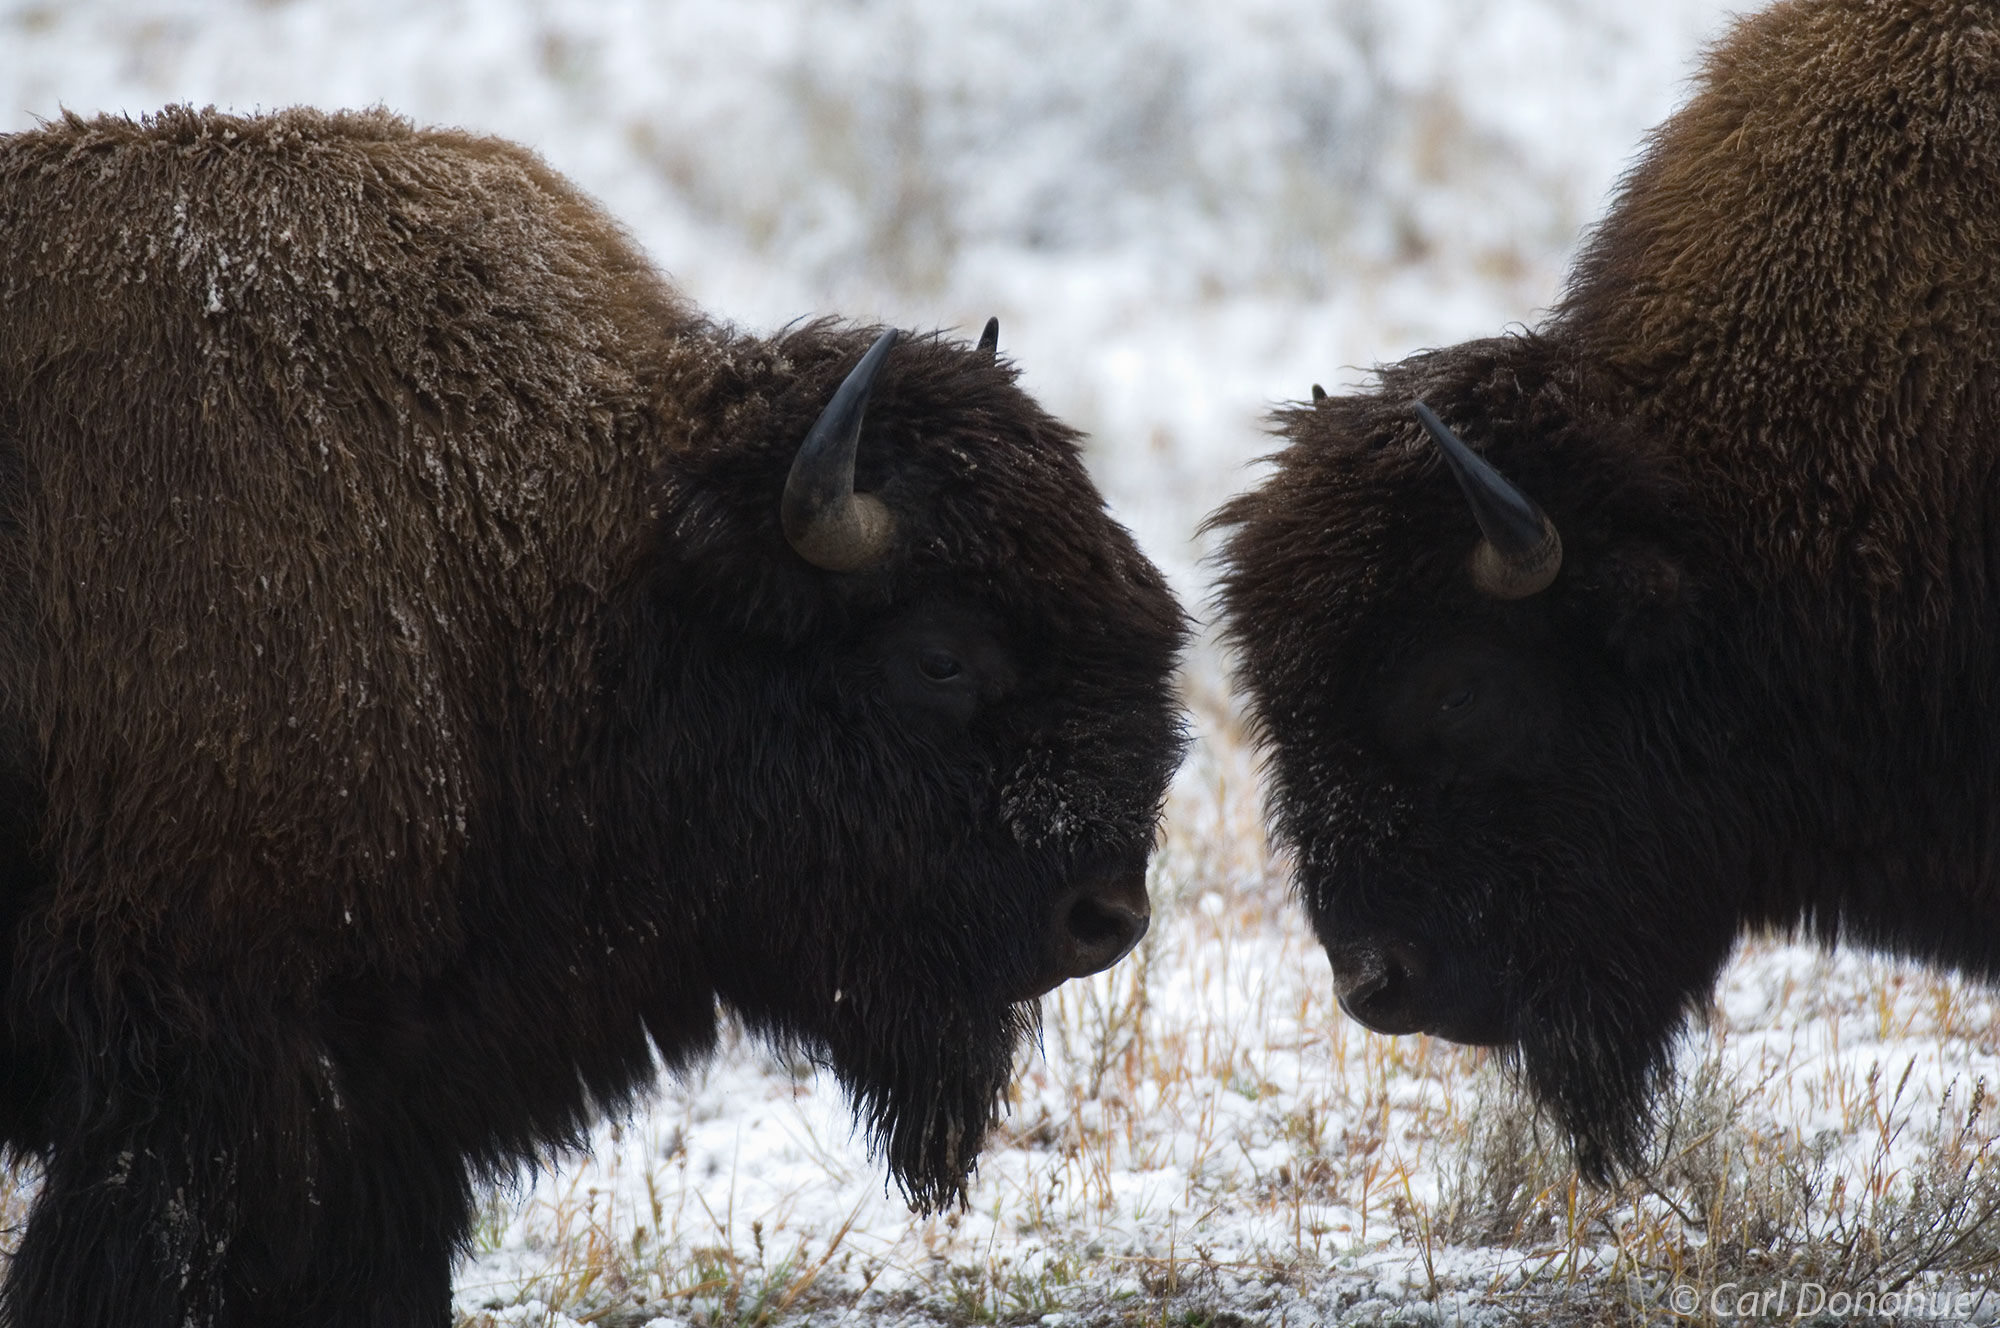 Bison standoff in the snow, Yellowstone National Park, Wyoming.